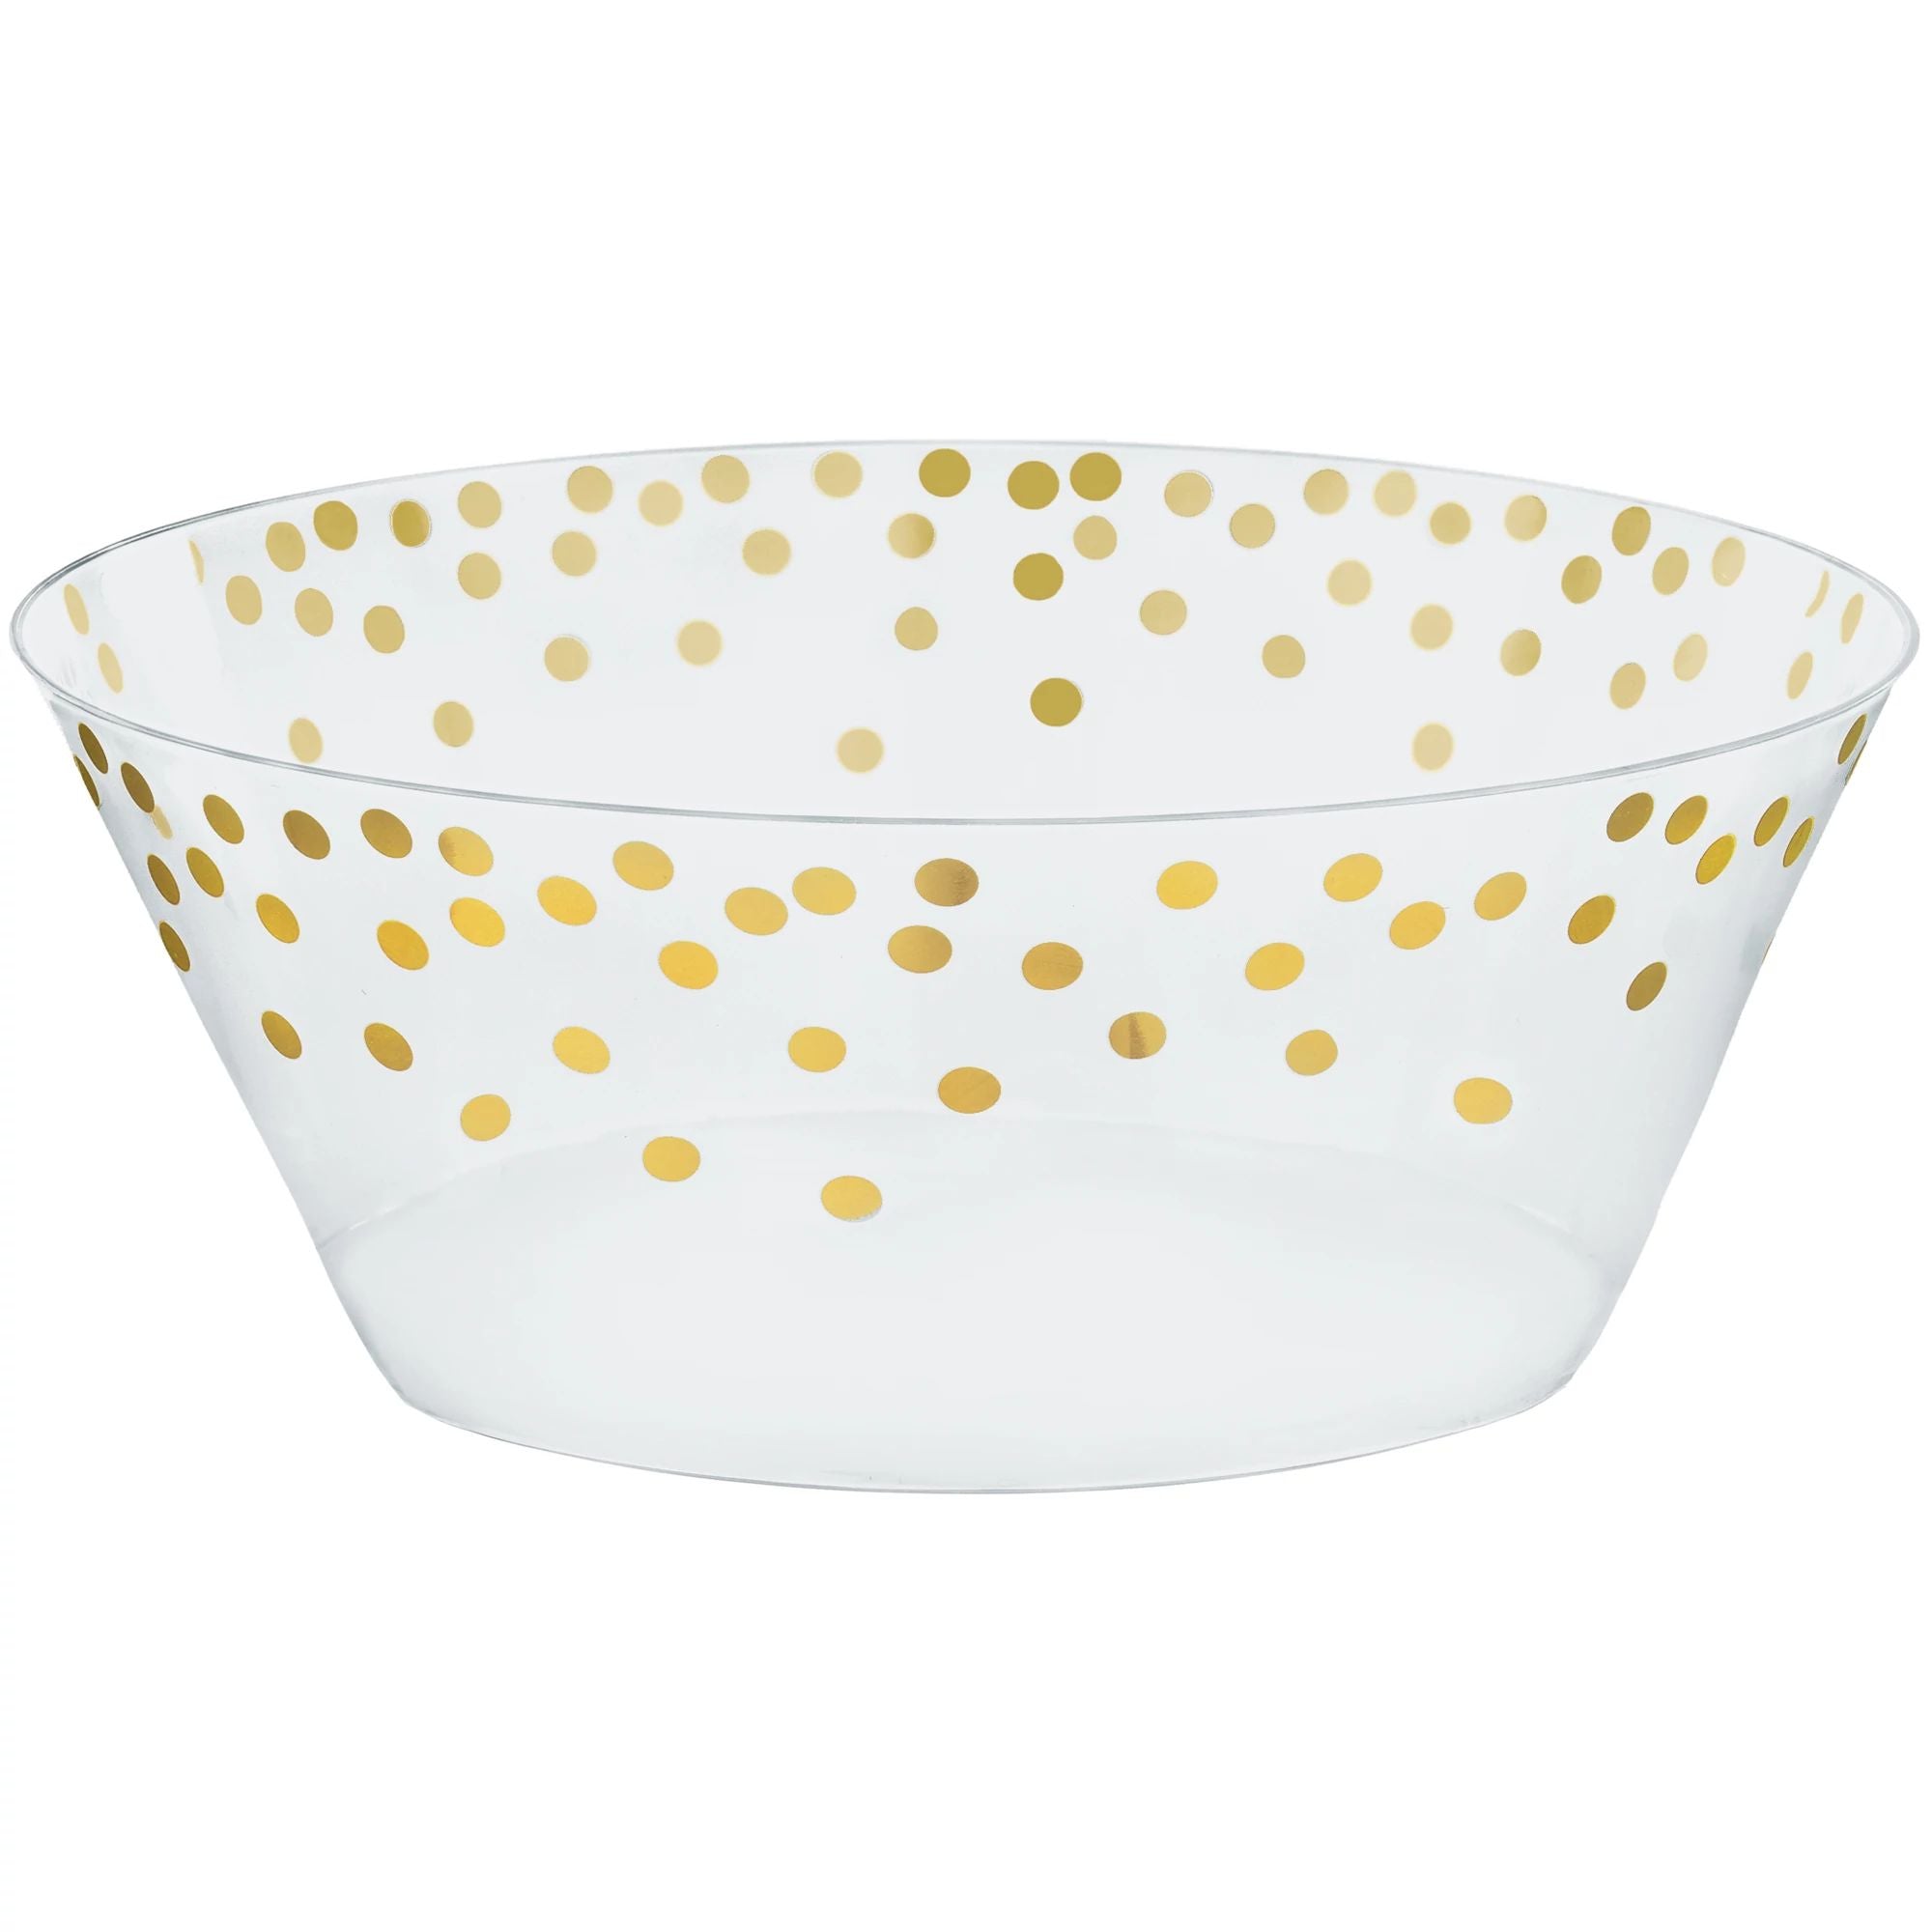 Small Serving Bowl, Recyclable - Gold Dots